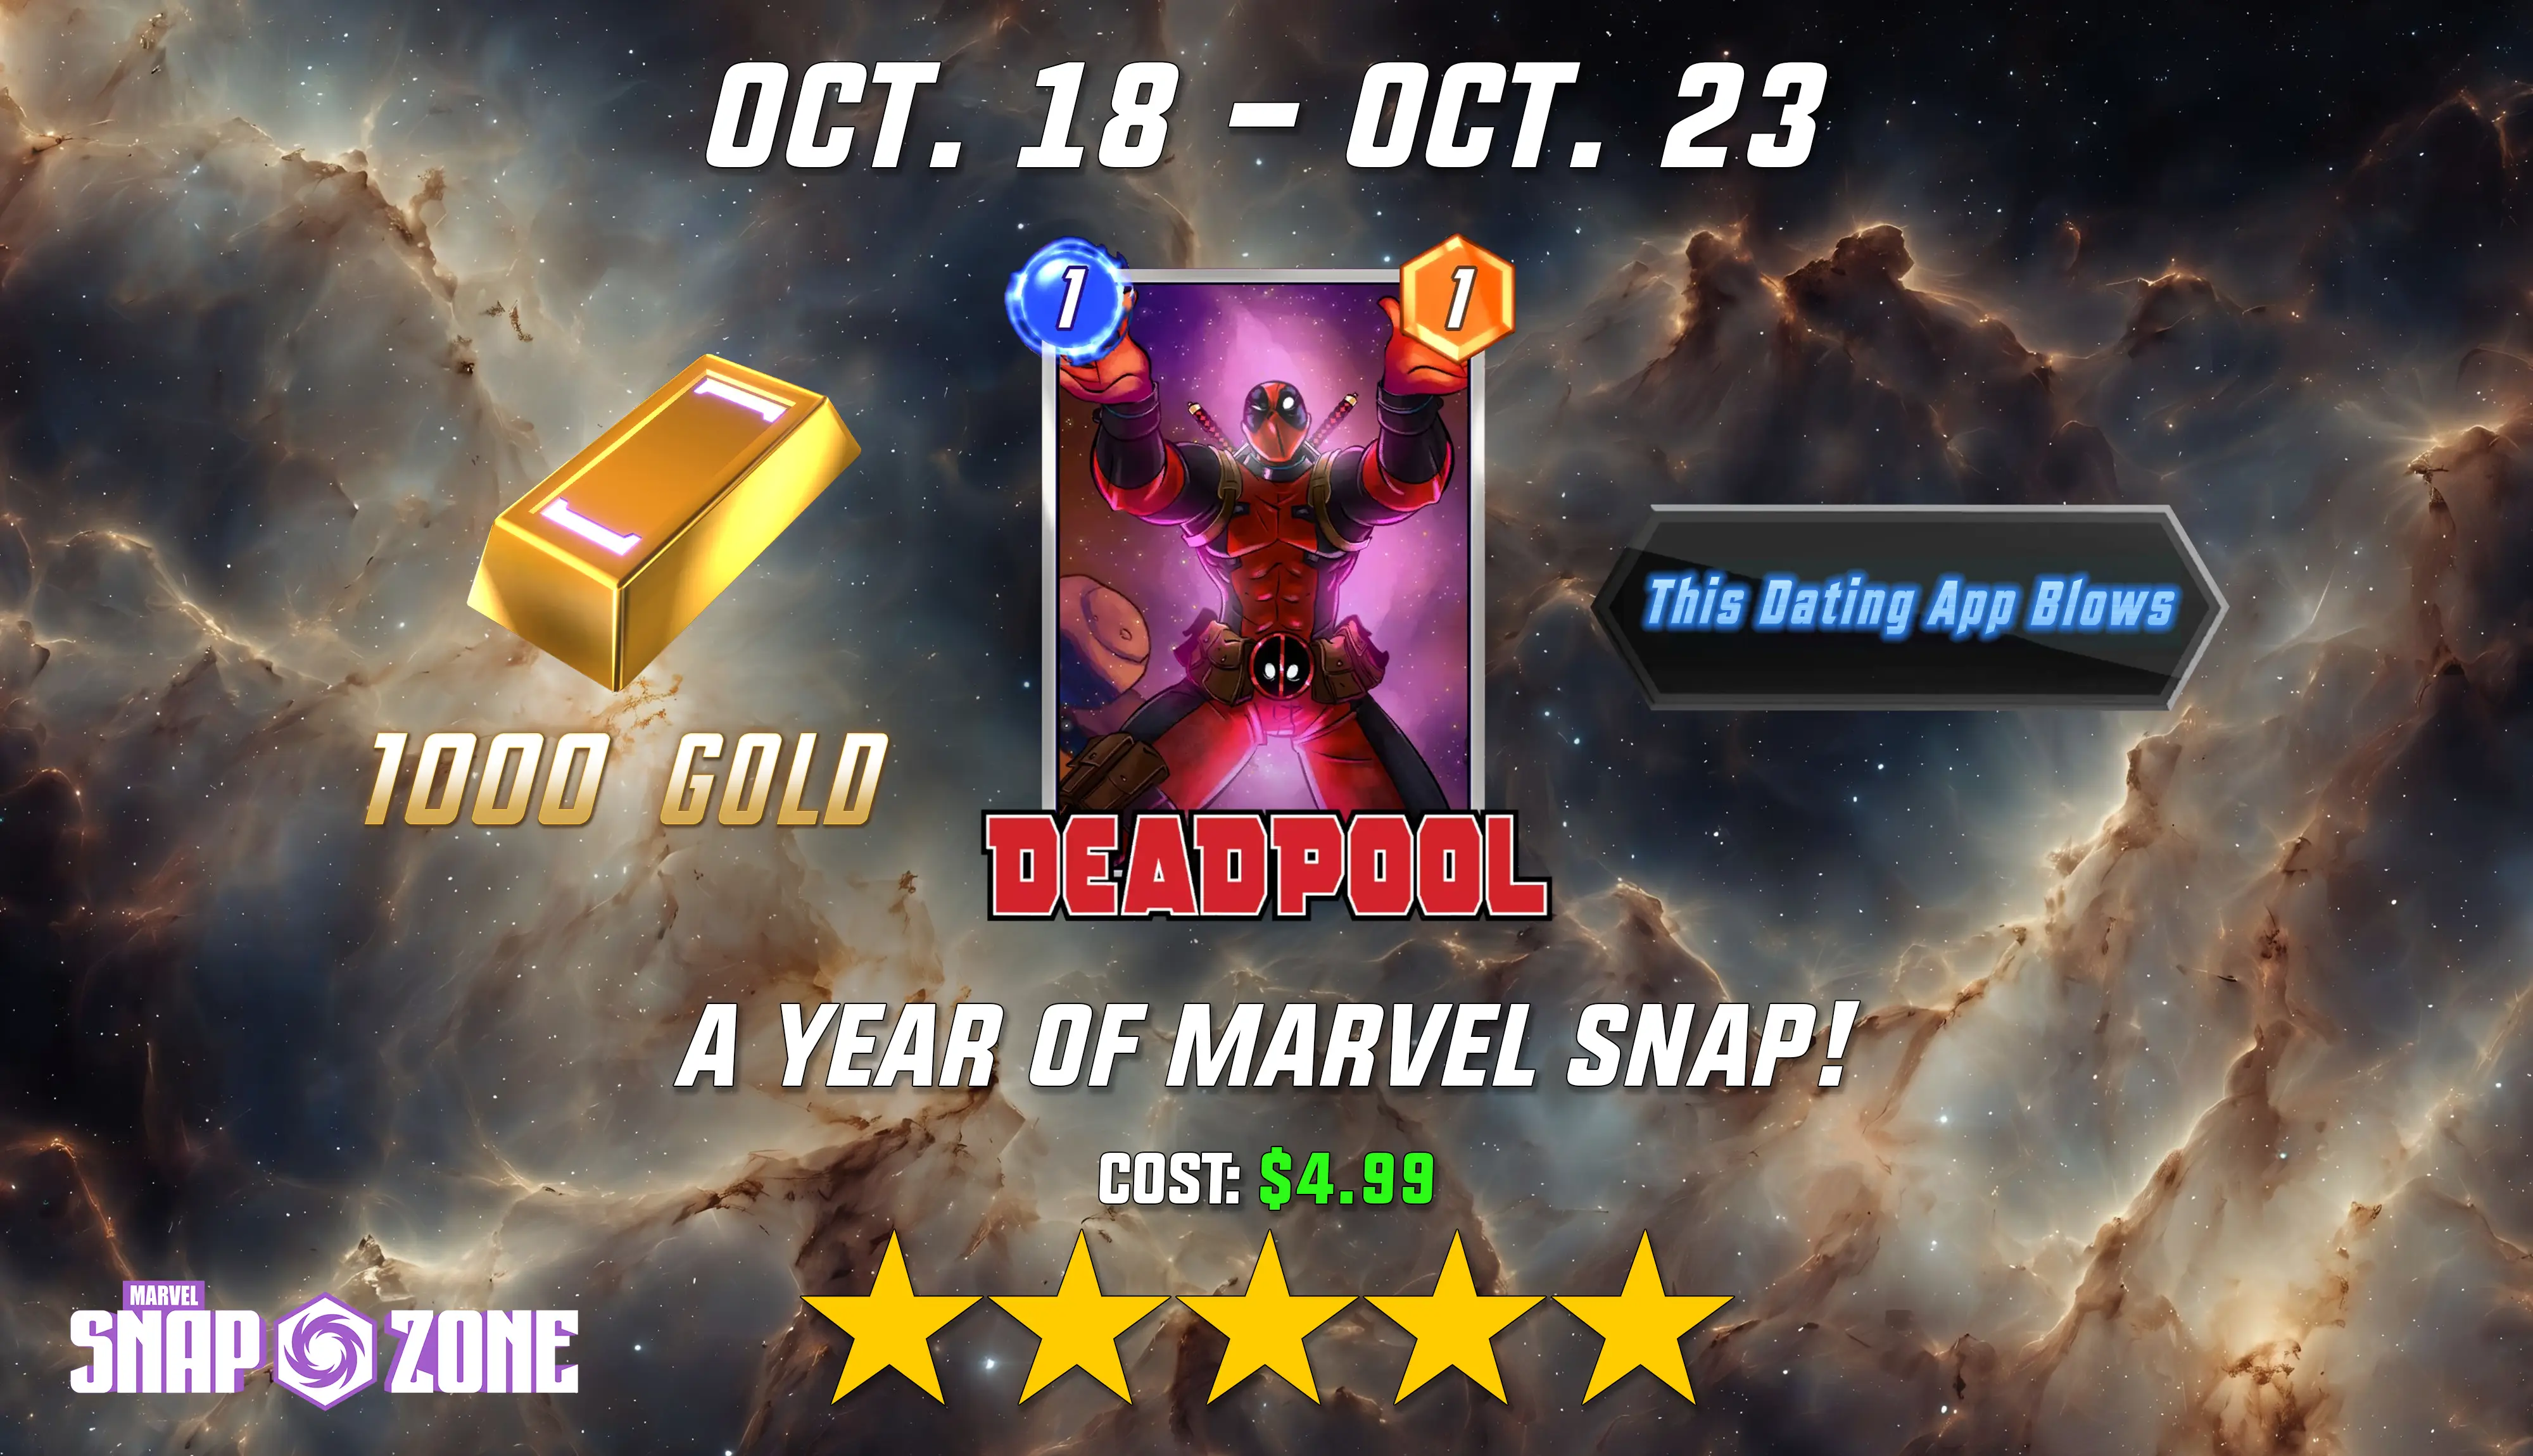 Marvel Snap Zone on X: The #MarvelSnap April 2023 Bundle Guide is